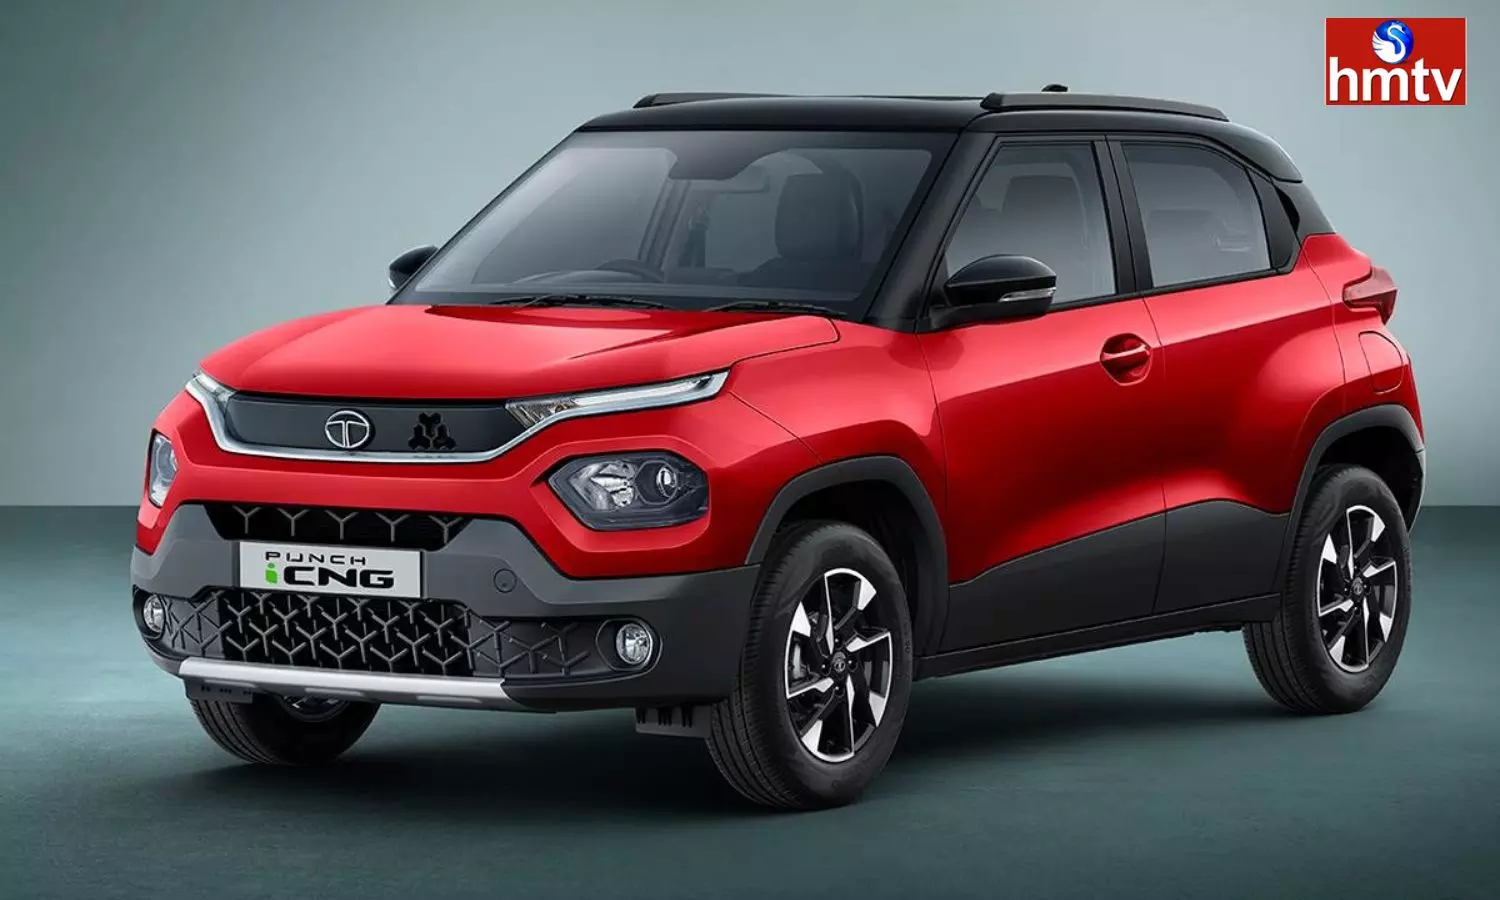 Tata Punch is cheapest compact SUV with 5 star safety rating check price mileage